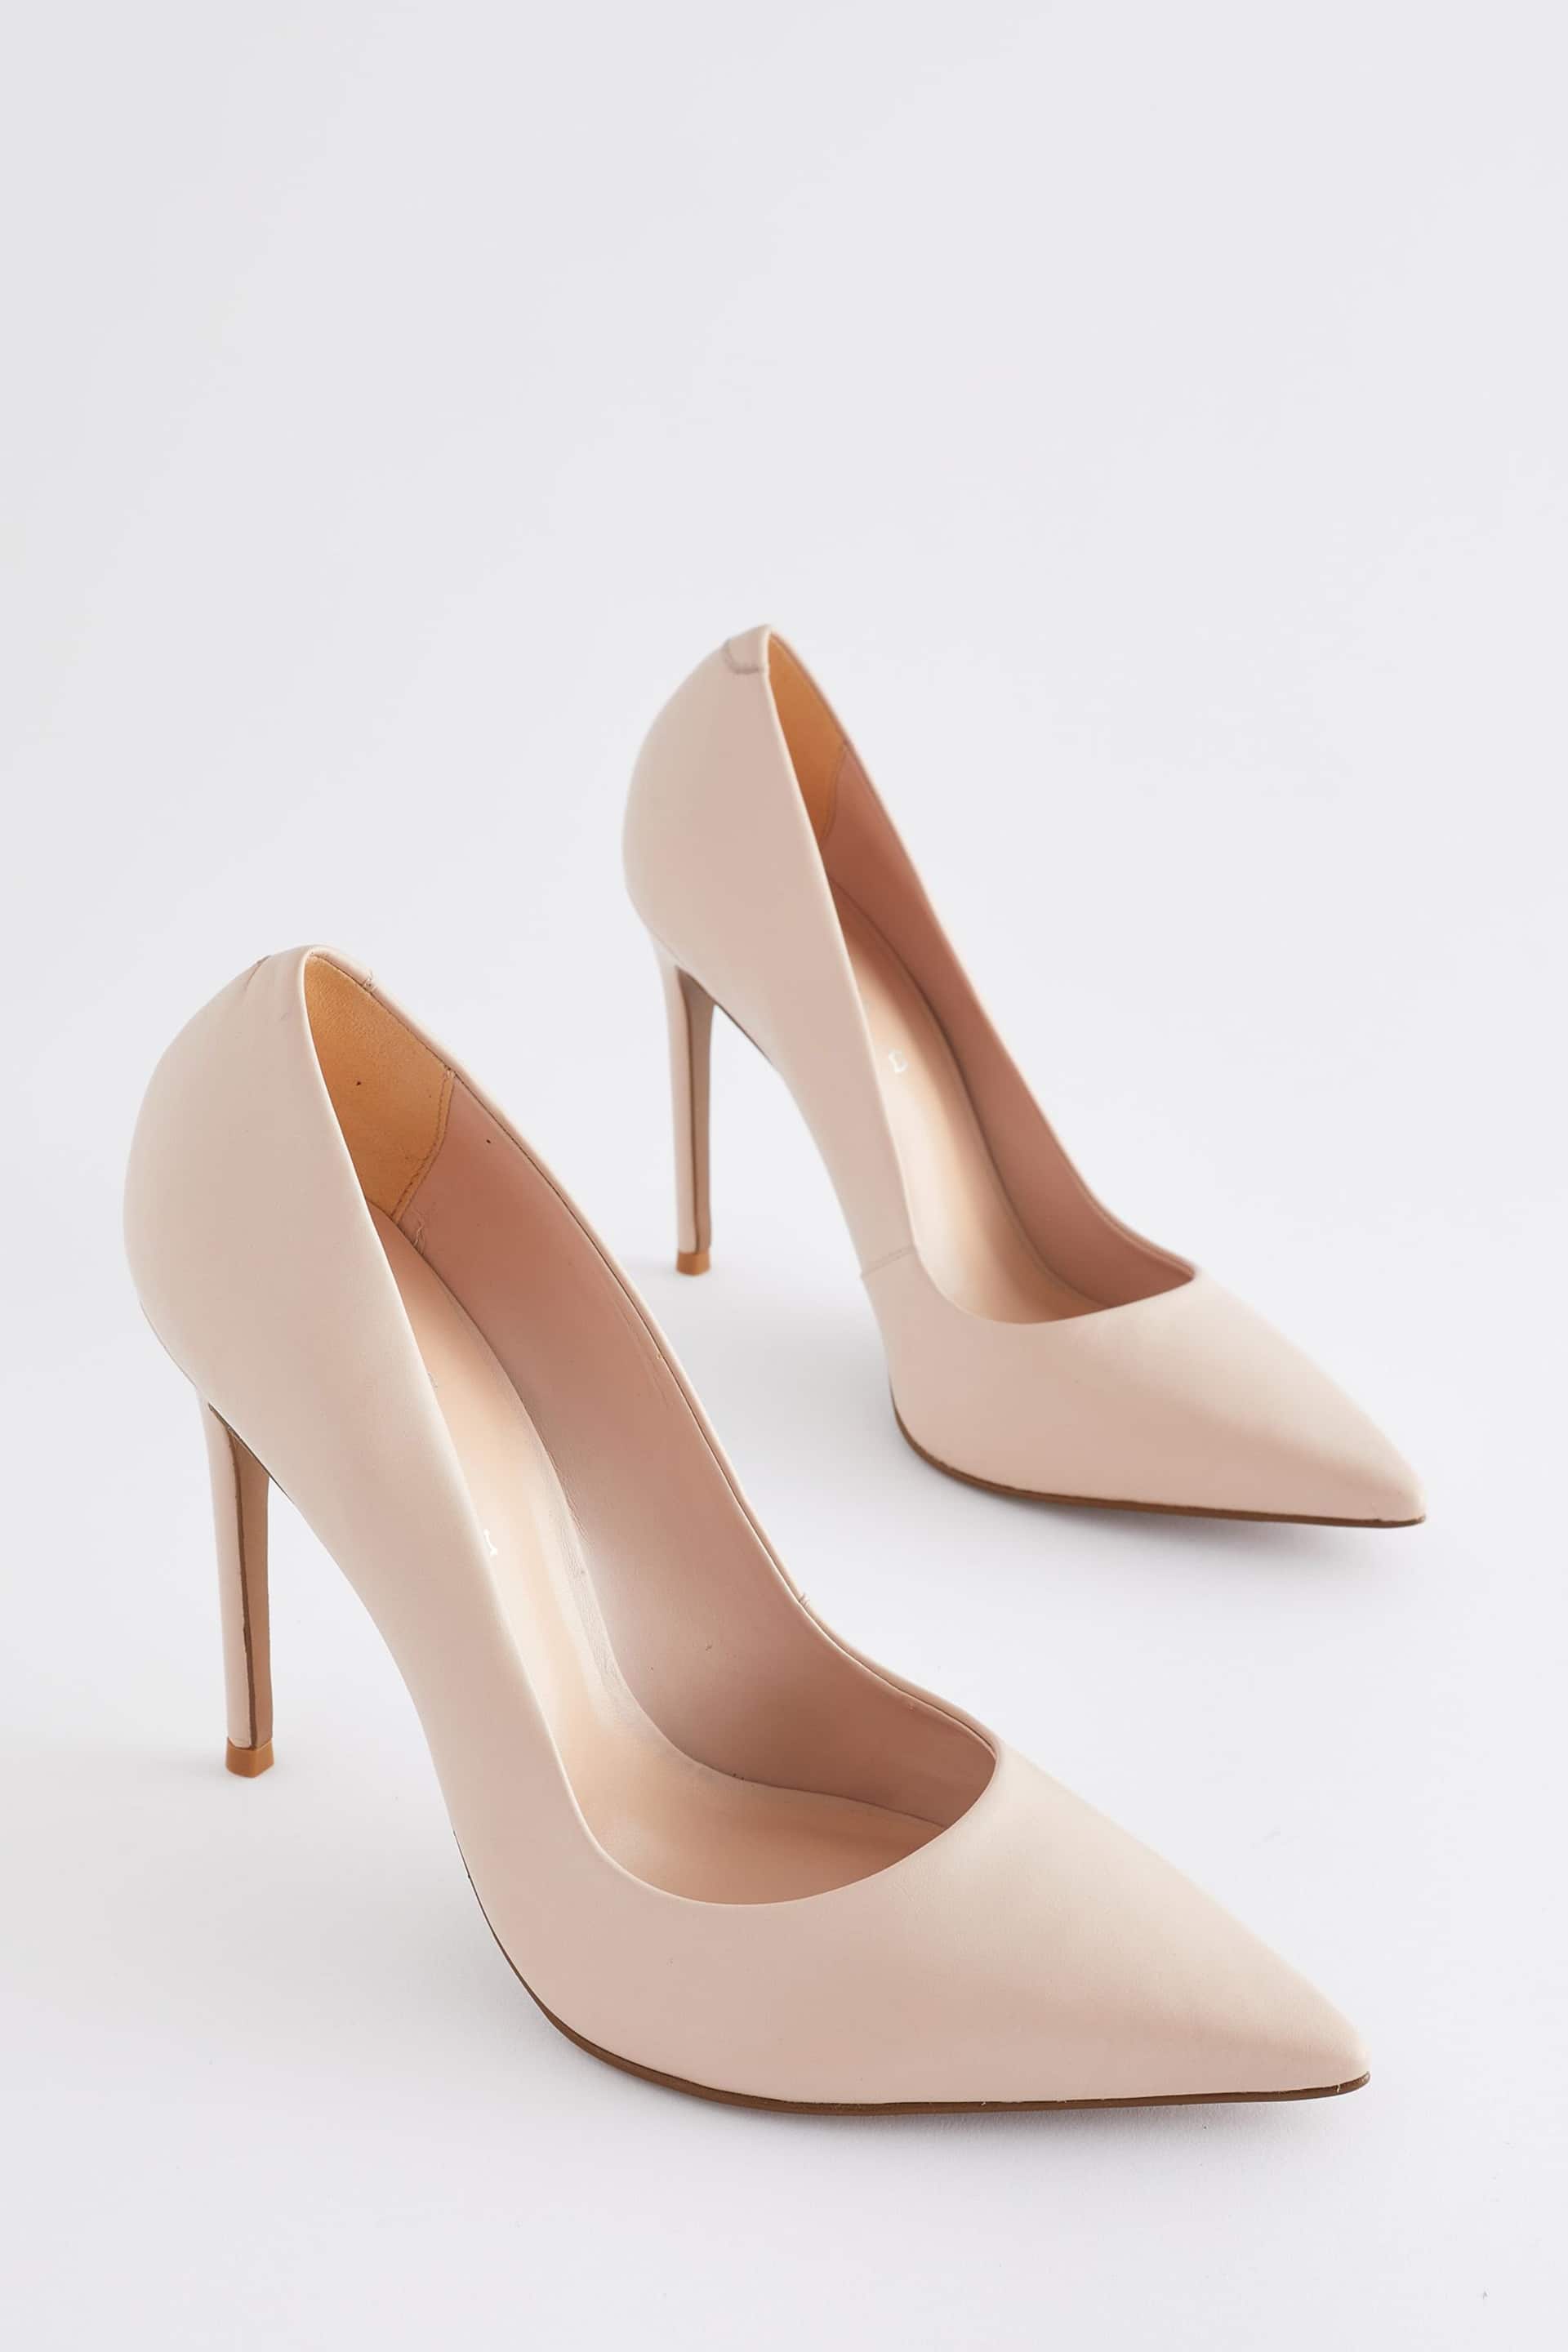 Nude Pink Signature Leather Court Shoes - Image 4 of 7